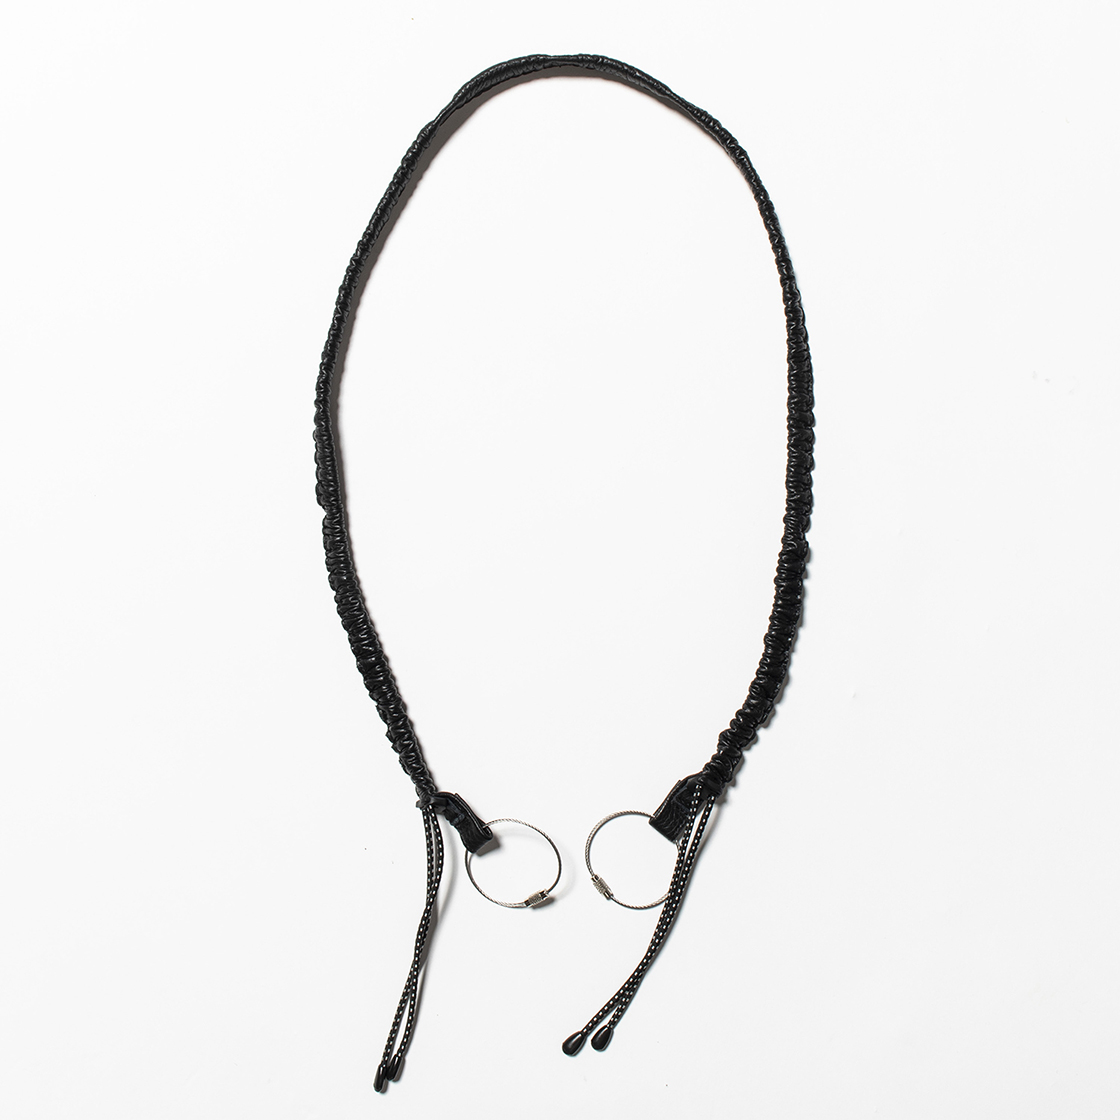 Bungee Leather Neck Strap Off Black